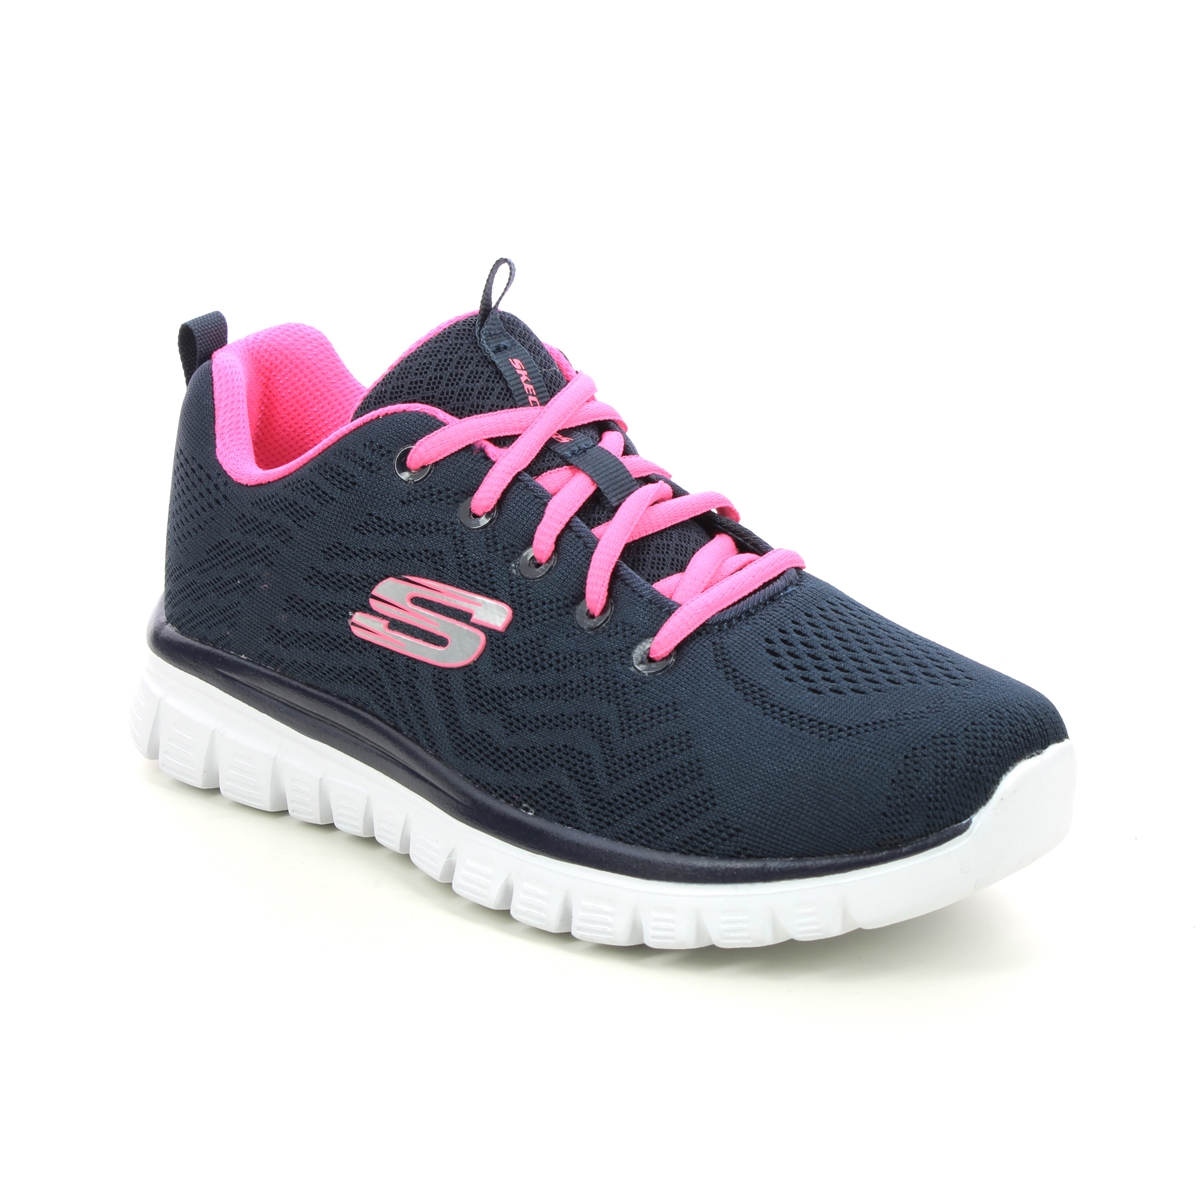 Skechers Graceful Get Connected NVHP Navy Pink Womens trainers 12615W in a Plain Textile in Size 4.5